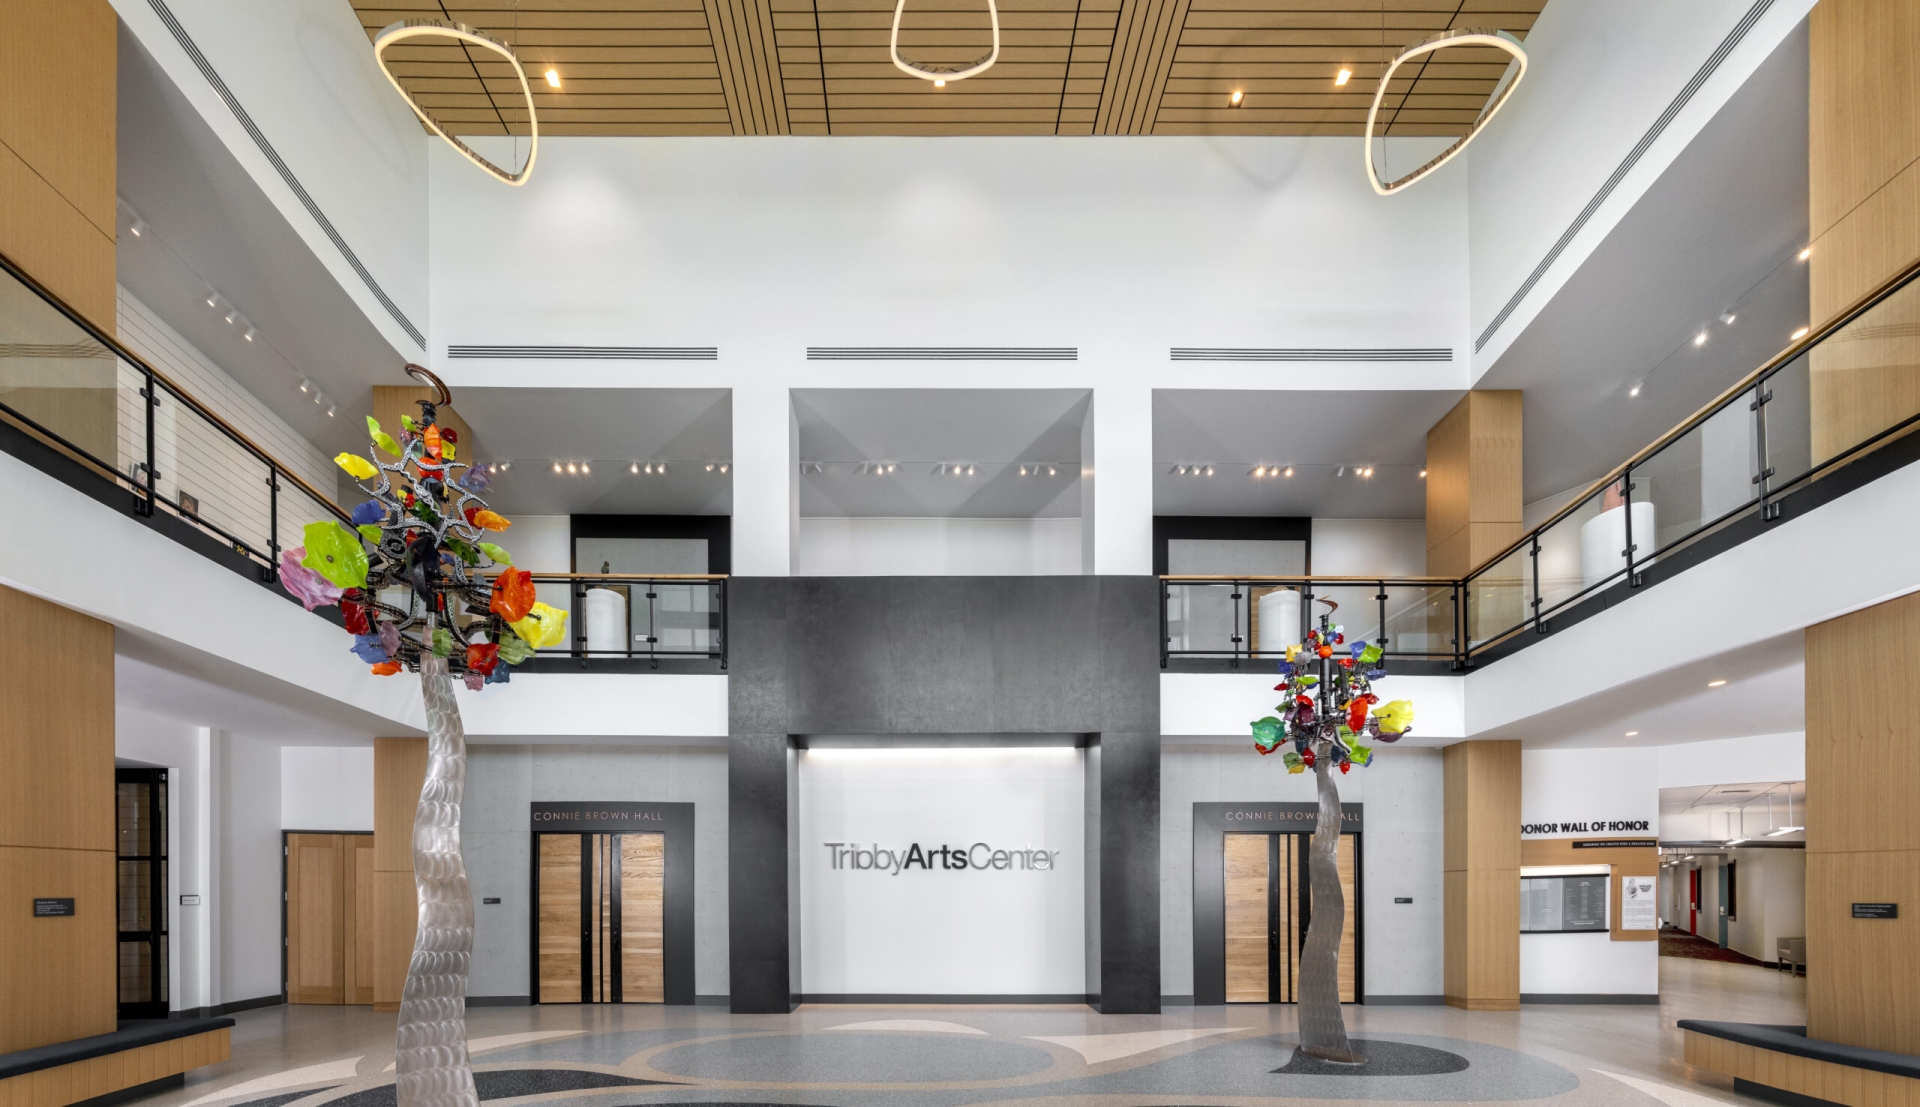 Picture of the entrance to The Tribby Arts Center Entrance with Atrium